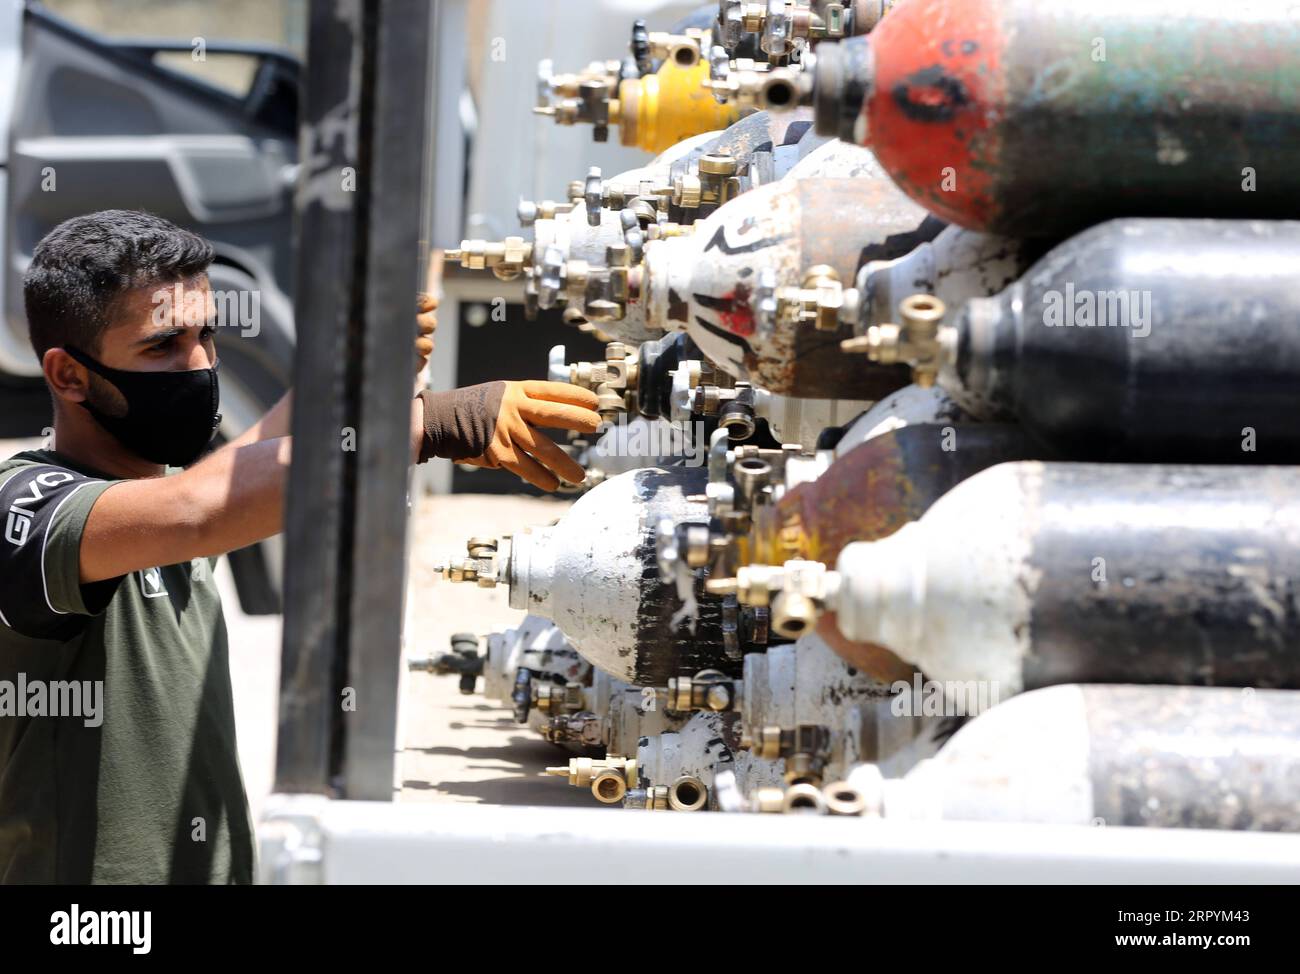 200707 -- BAGHDAD, July 7, 2020 Xinhua -- A worker checks oxygen cylinders to be delivered to hospitals at an oxygen refilling station in Baghdad, Iraq, on July 7, 2020. A government-owned oxygen filling factory in Iraq has increased its filling of oxygen cylinders and the liquid gas to meet the demand of the Iraqi hospitals amid the continued rise in COVID-19 infections. The resurgence of COVID-19 pandemic continued in Iraq on Tuesday, as the Iraqi Health Ministry confirmed 2,426 new cases, bringing the total number of coronavirus infections nationwide to 64,701. Xinhua IRAQ-BAGHDAD-COVID-19- Stock Photo